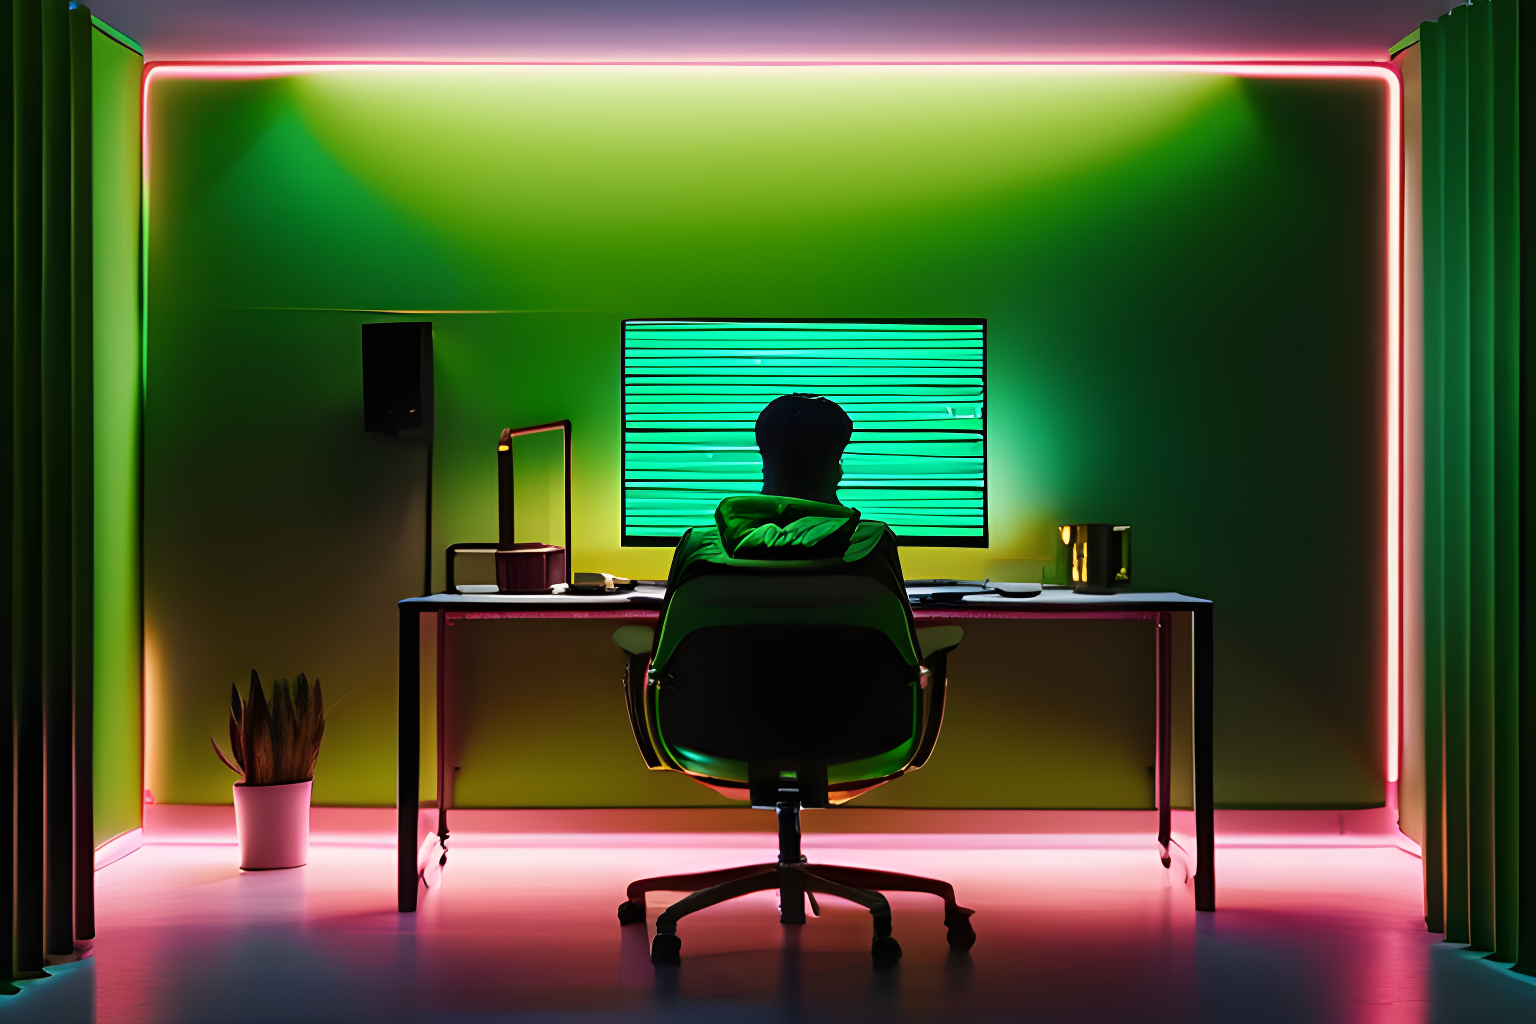 A person hunched over their monitor screen in a dimly lit green room